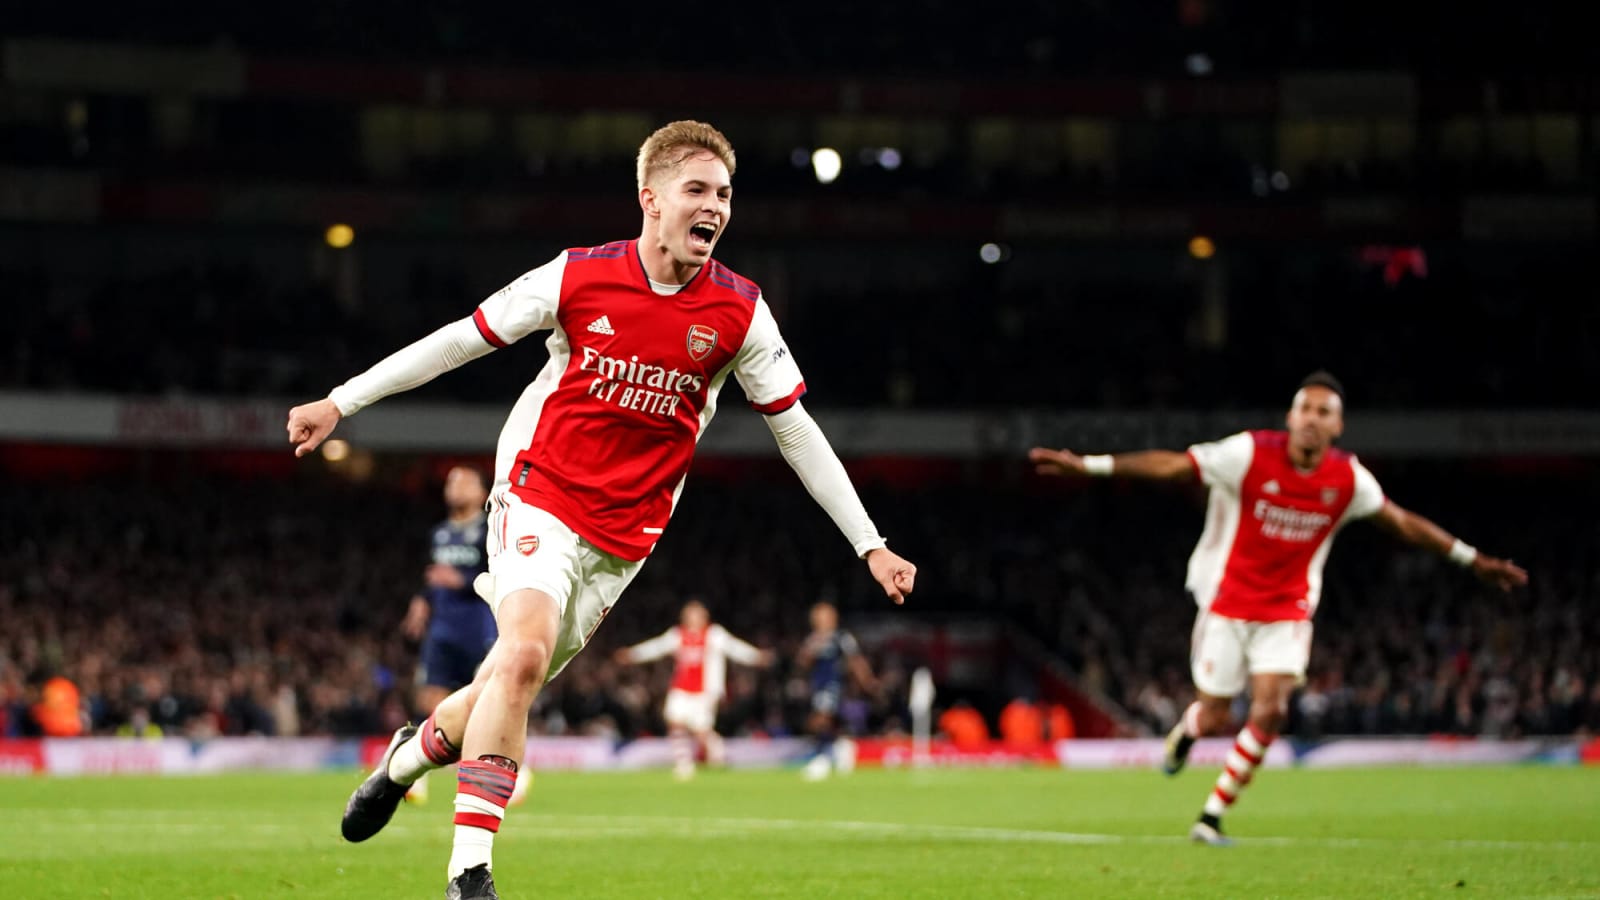 Arsenal have already made their decision on Emile Smith Rowe’s future with transfer window about to open